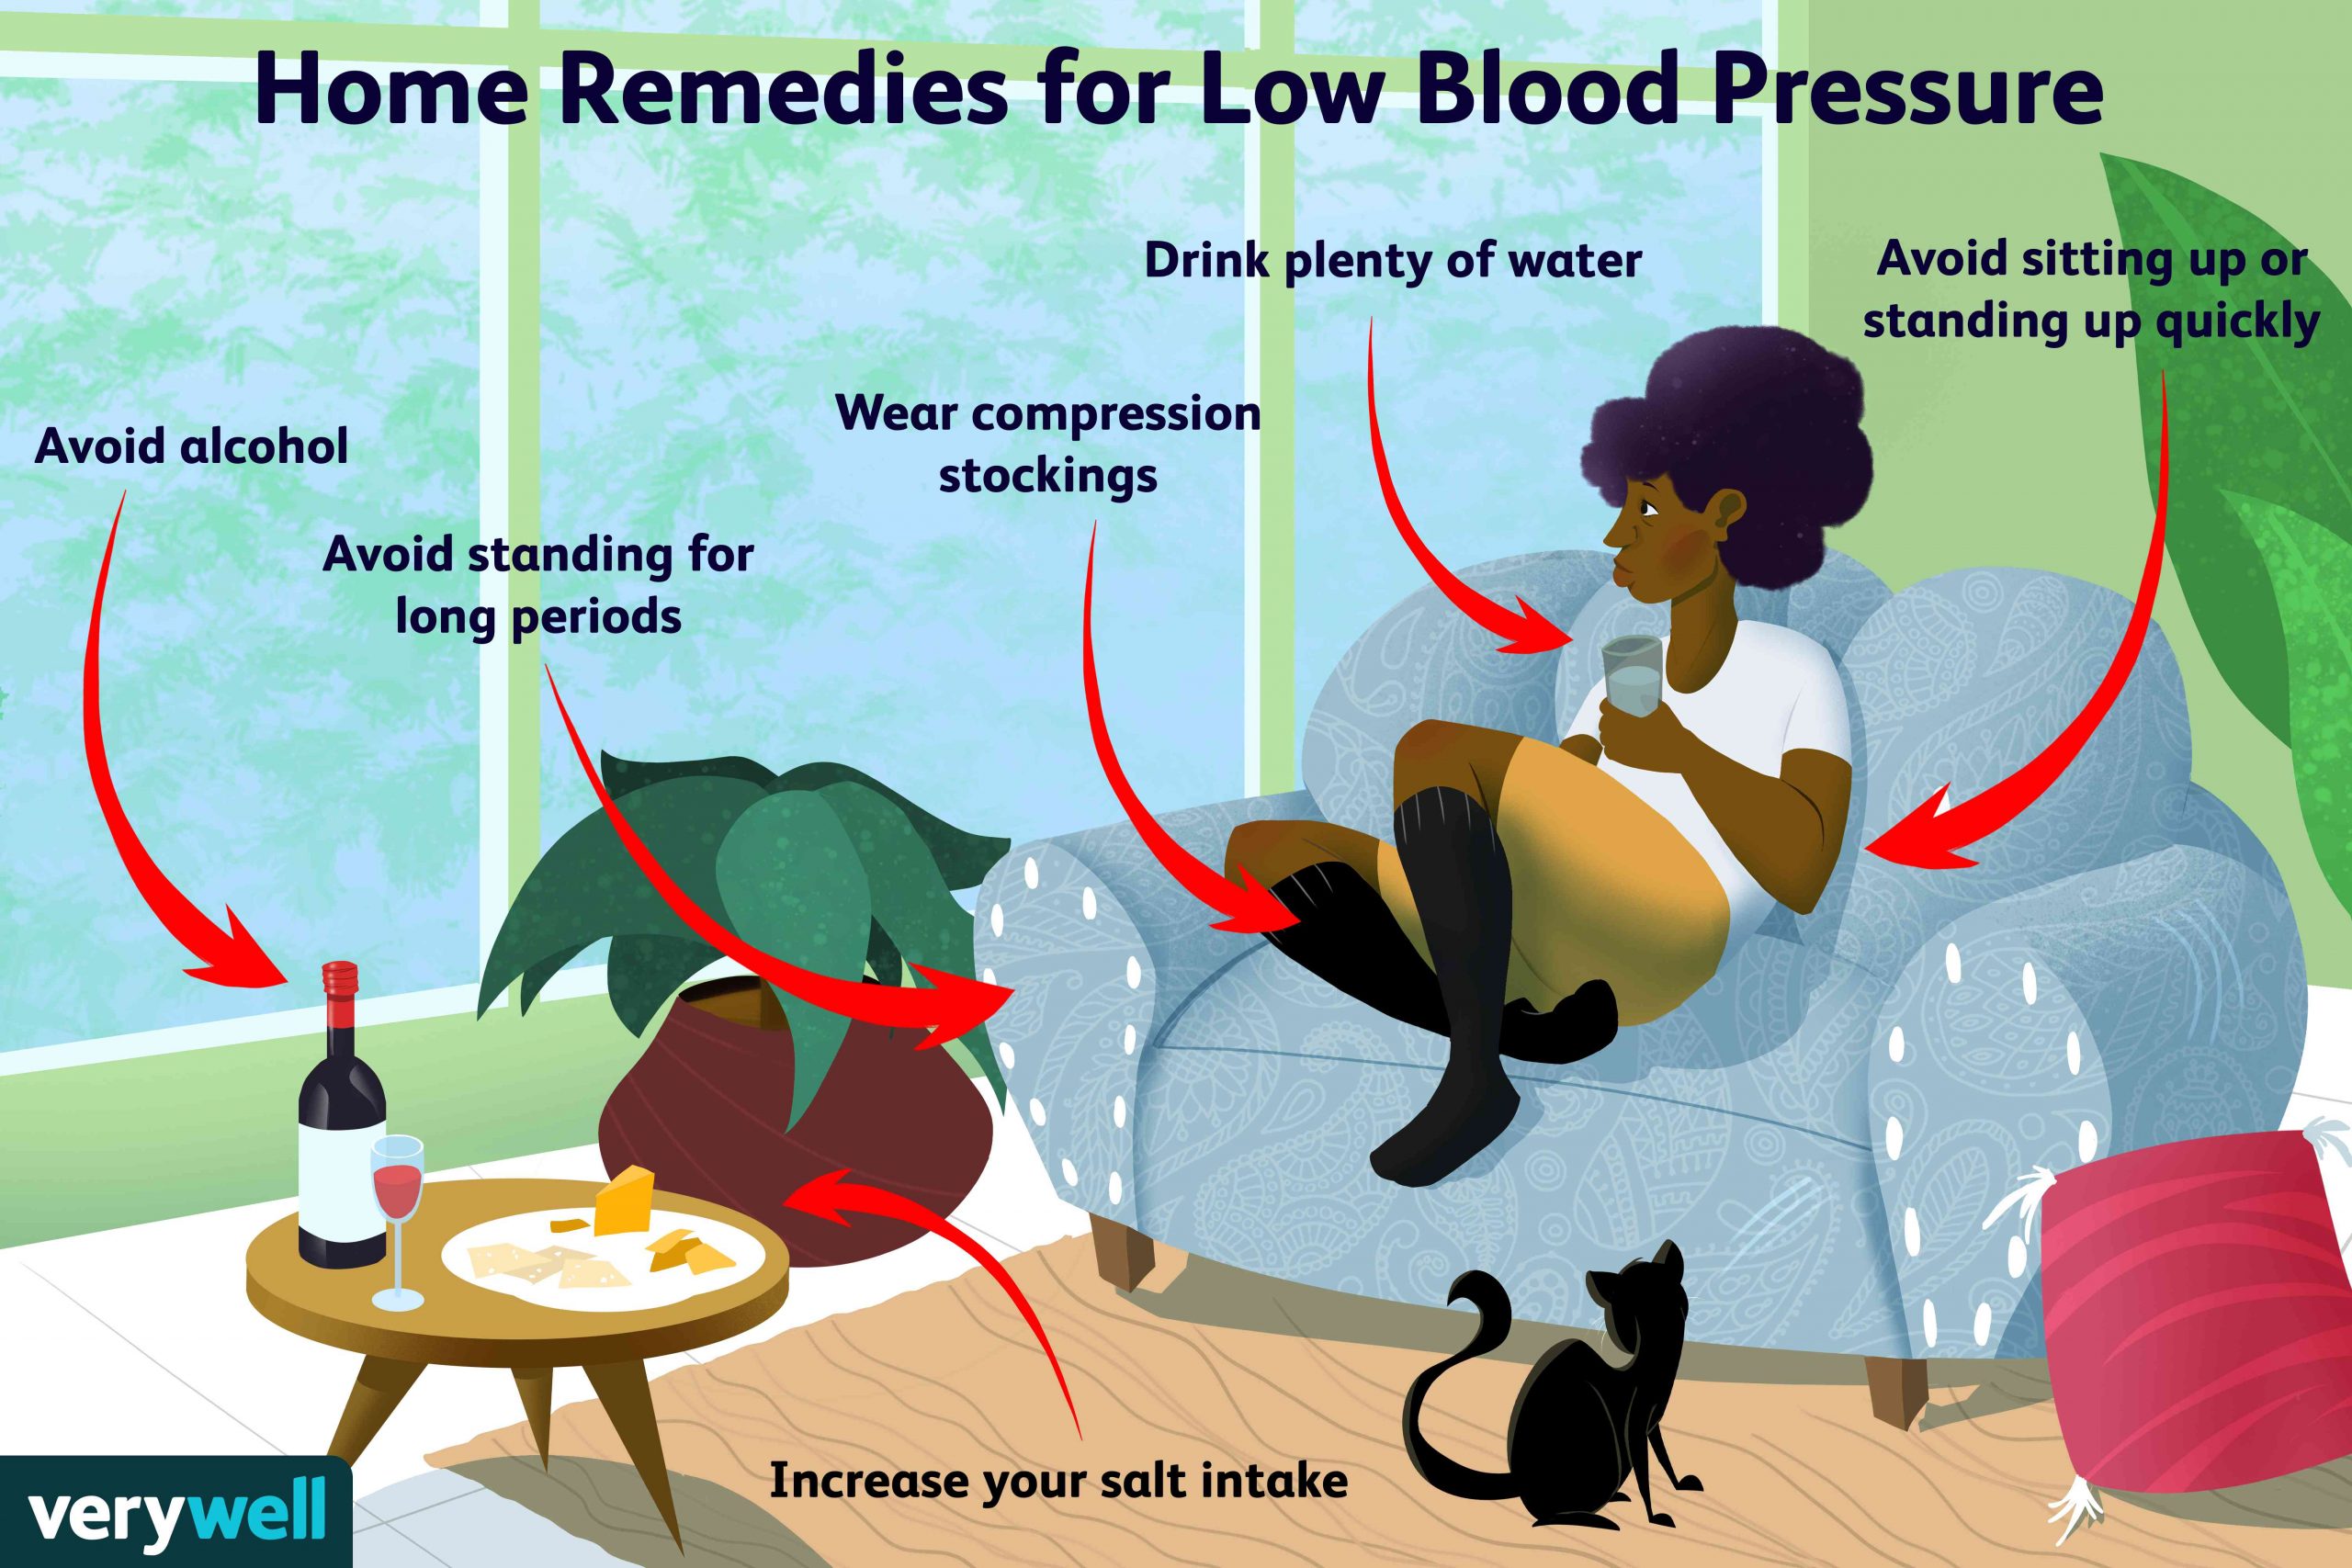 How Low Blood Pressure Is Treated